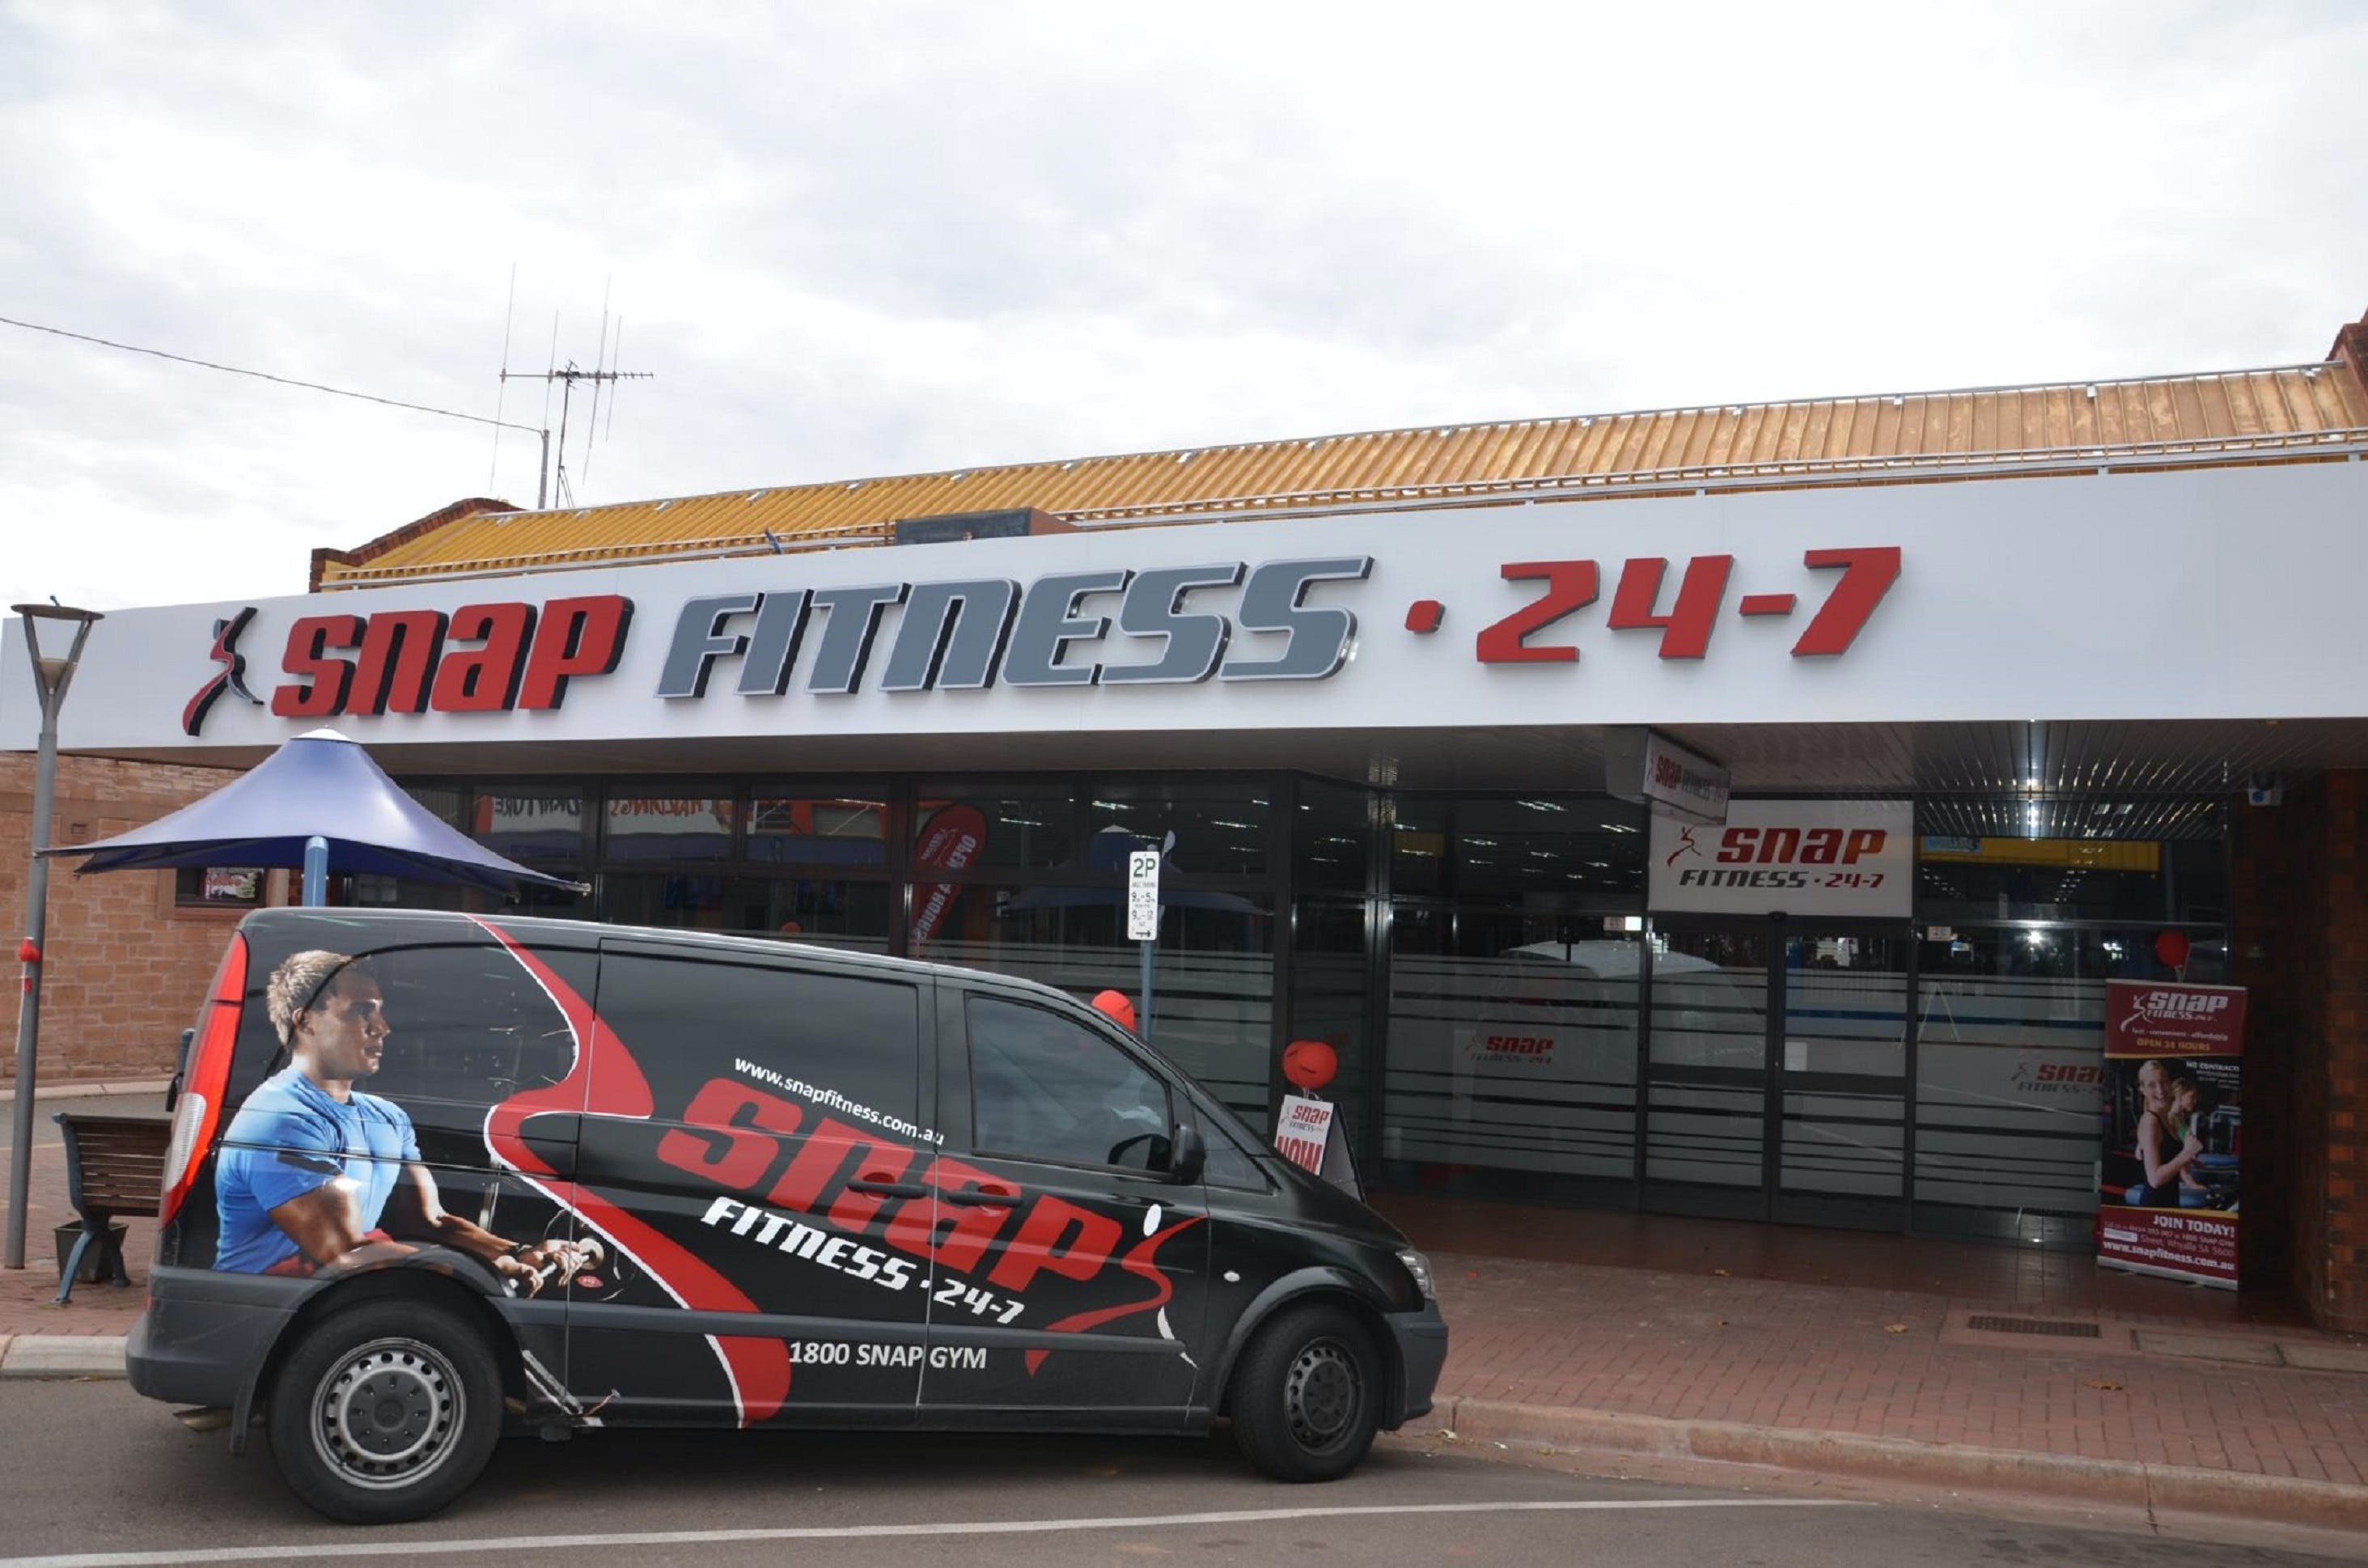 Snap Fitness Whyalla 24/7 gym - Accommodation in Brisbane